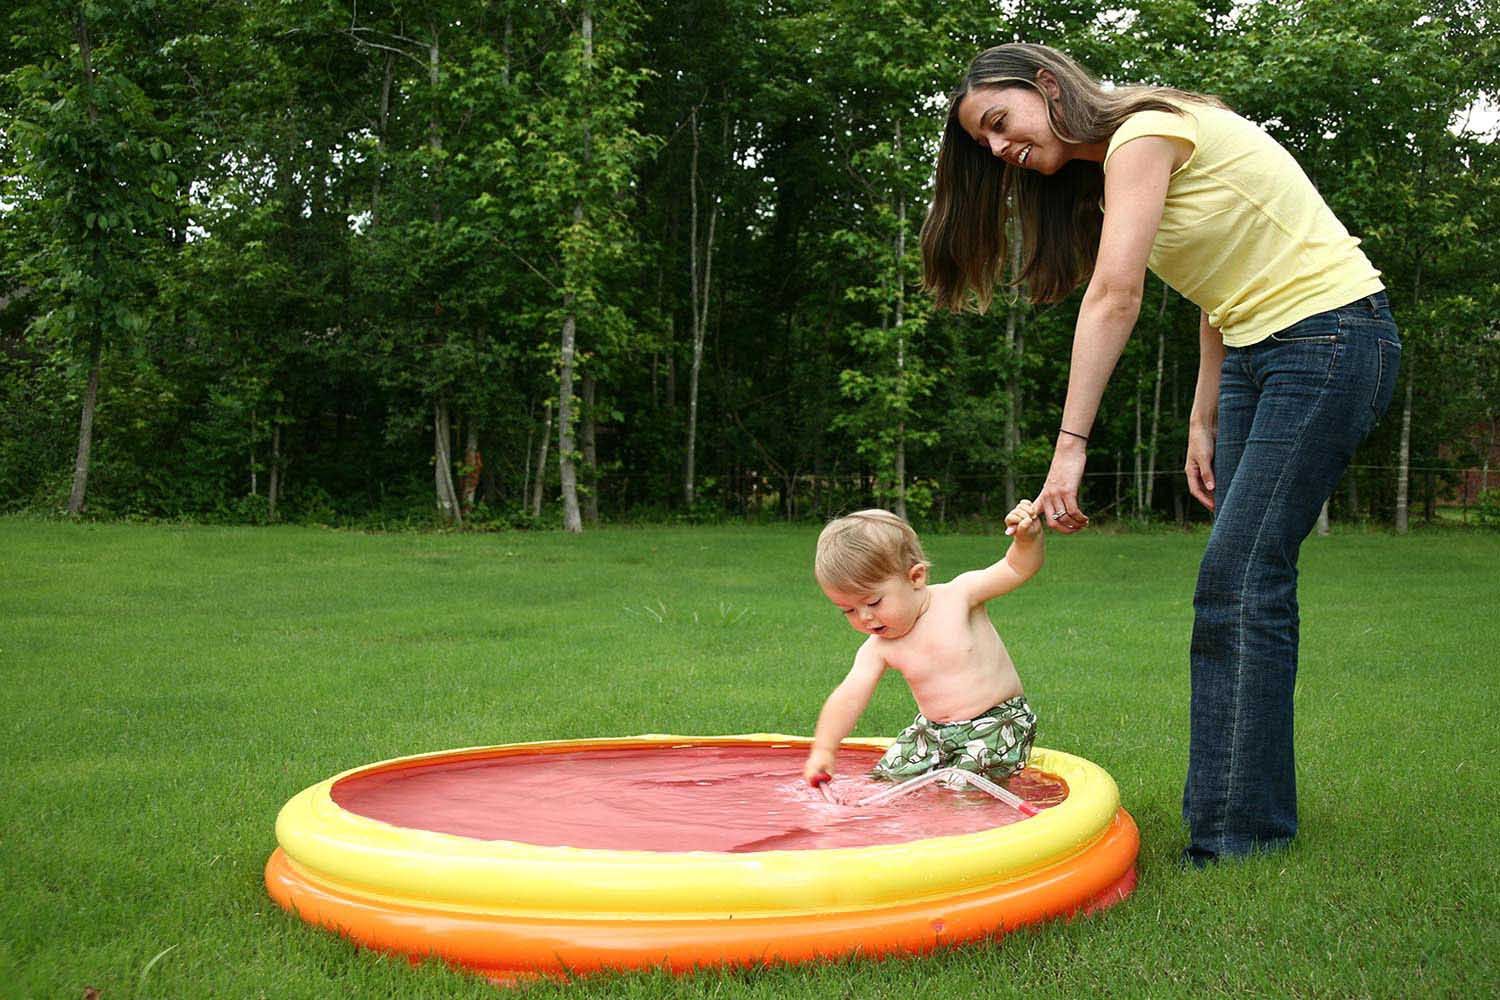 mom and son Splash Around in a Kiddie Pool